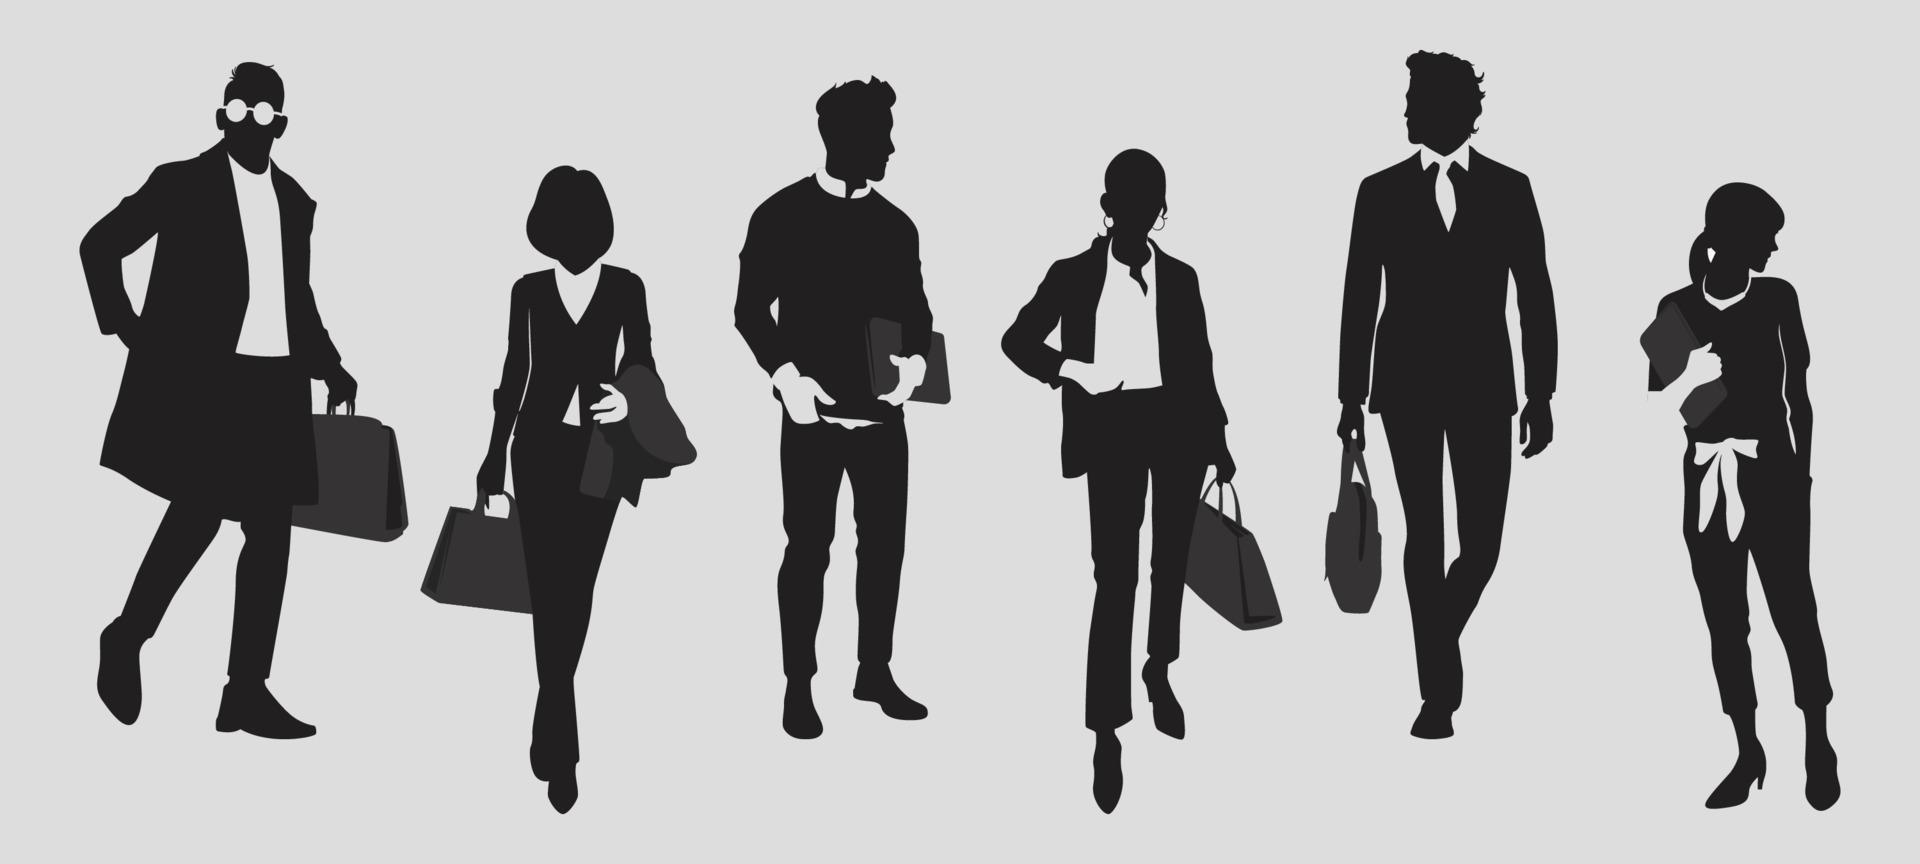 Business Man and Woman with Stuff on Their Hands Silhouettes vector